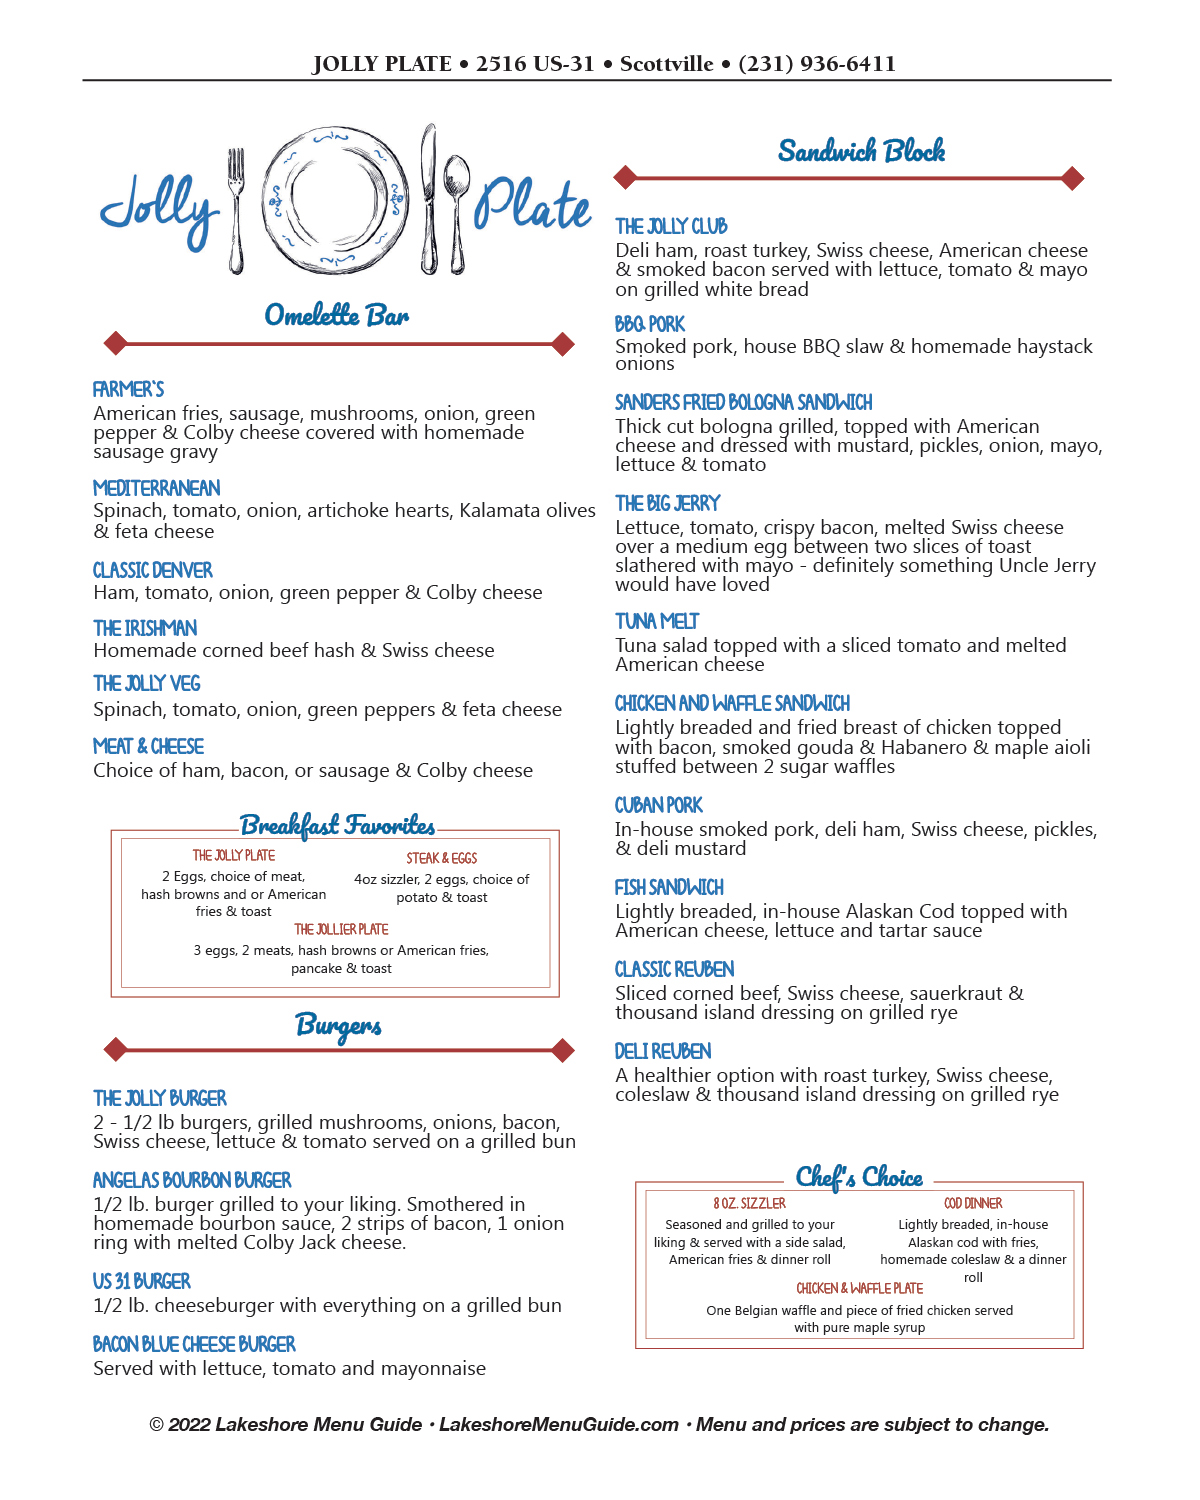 Menu for Jolly Plate in Scottville from the Lakeshore Menu Guide